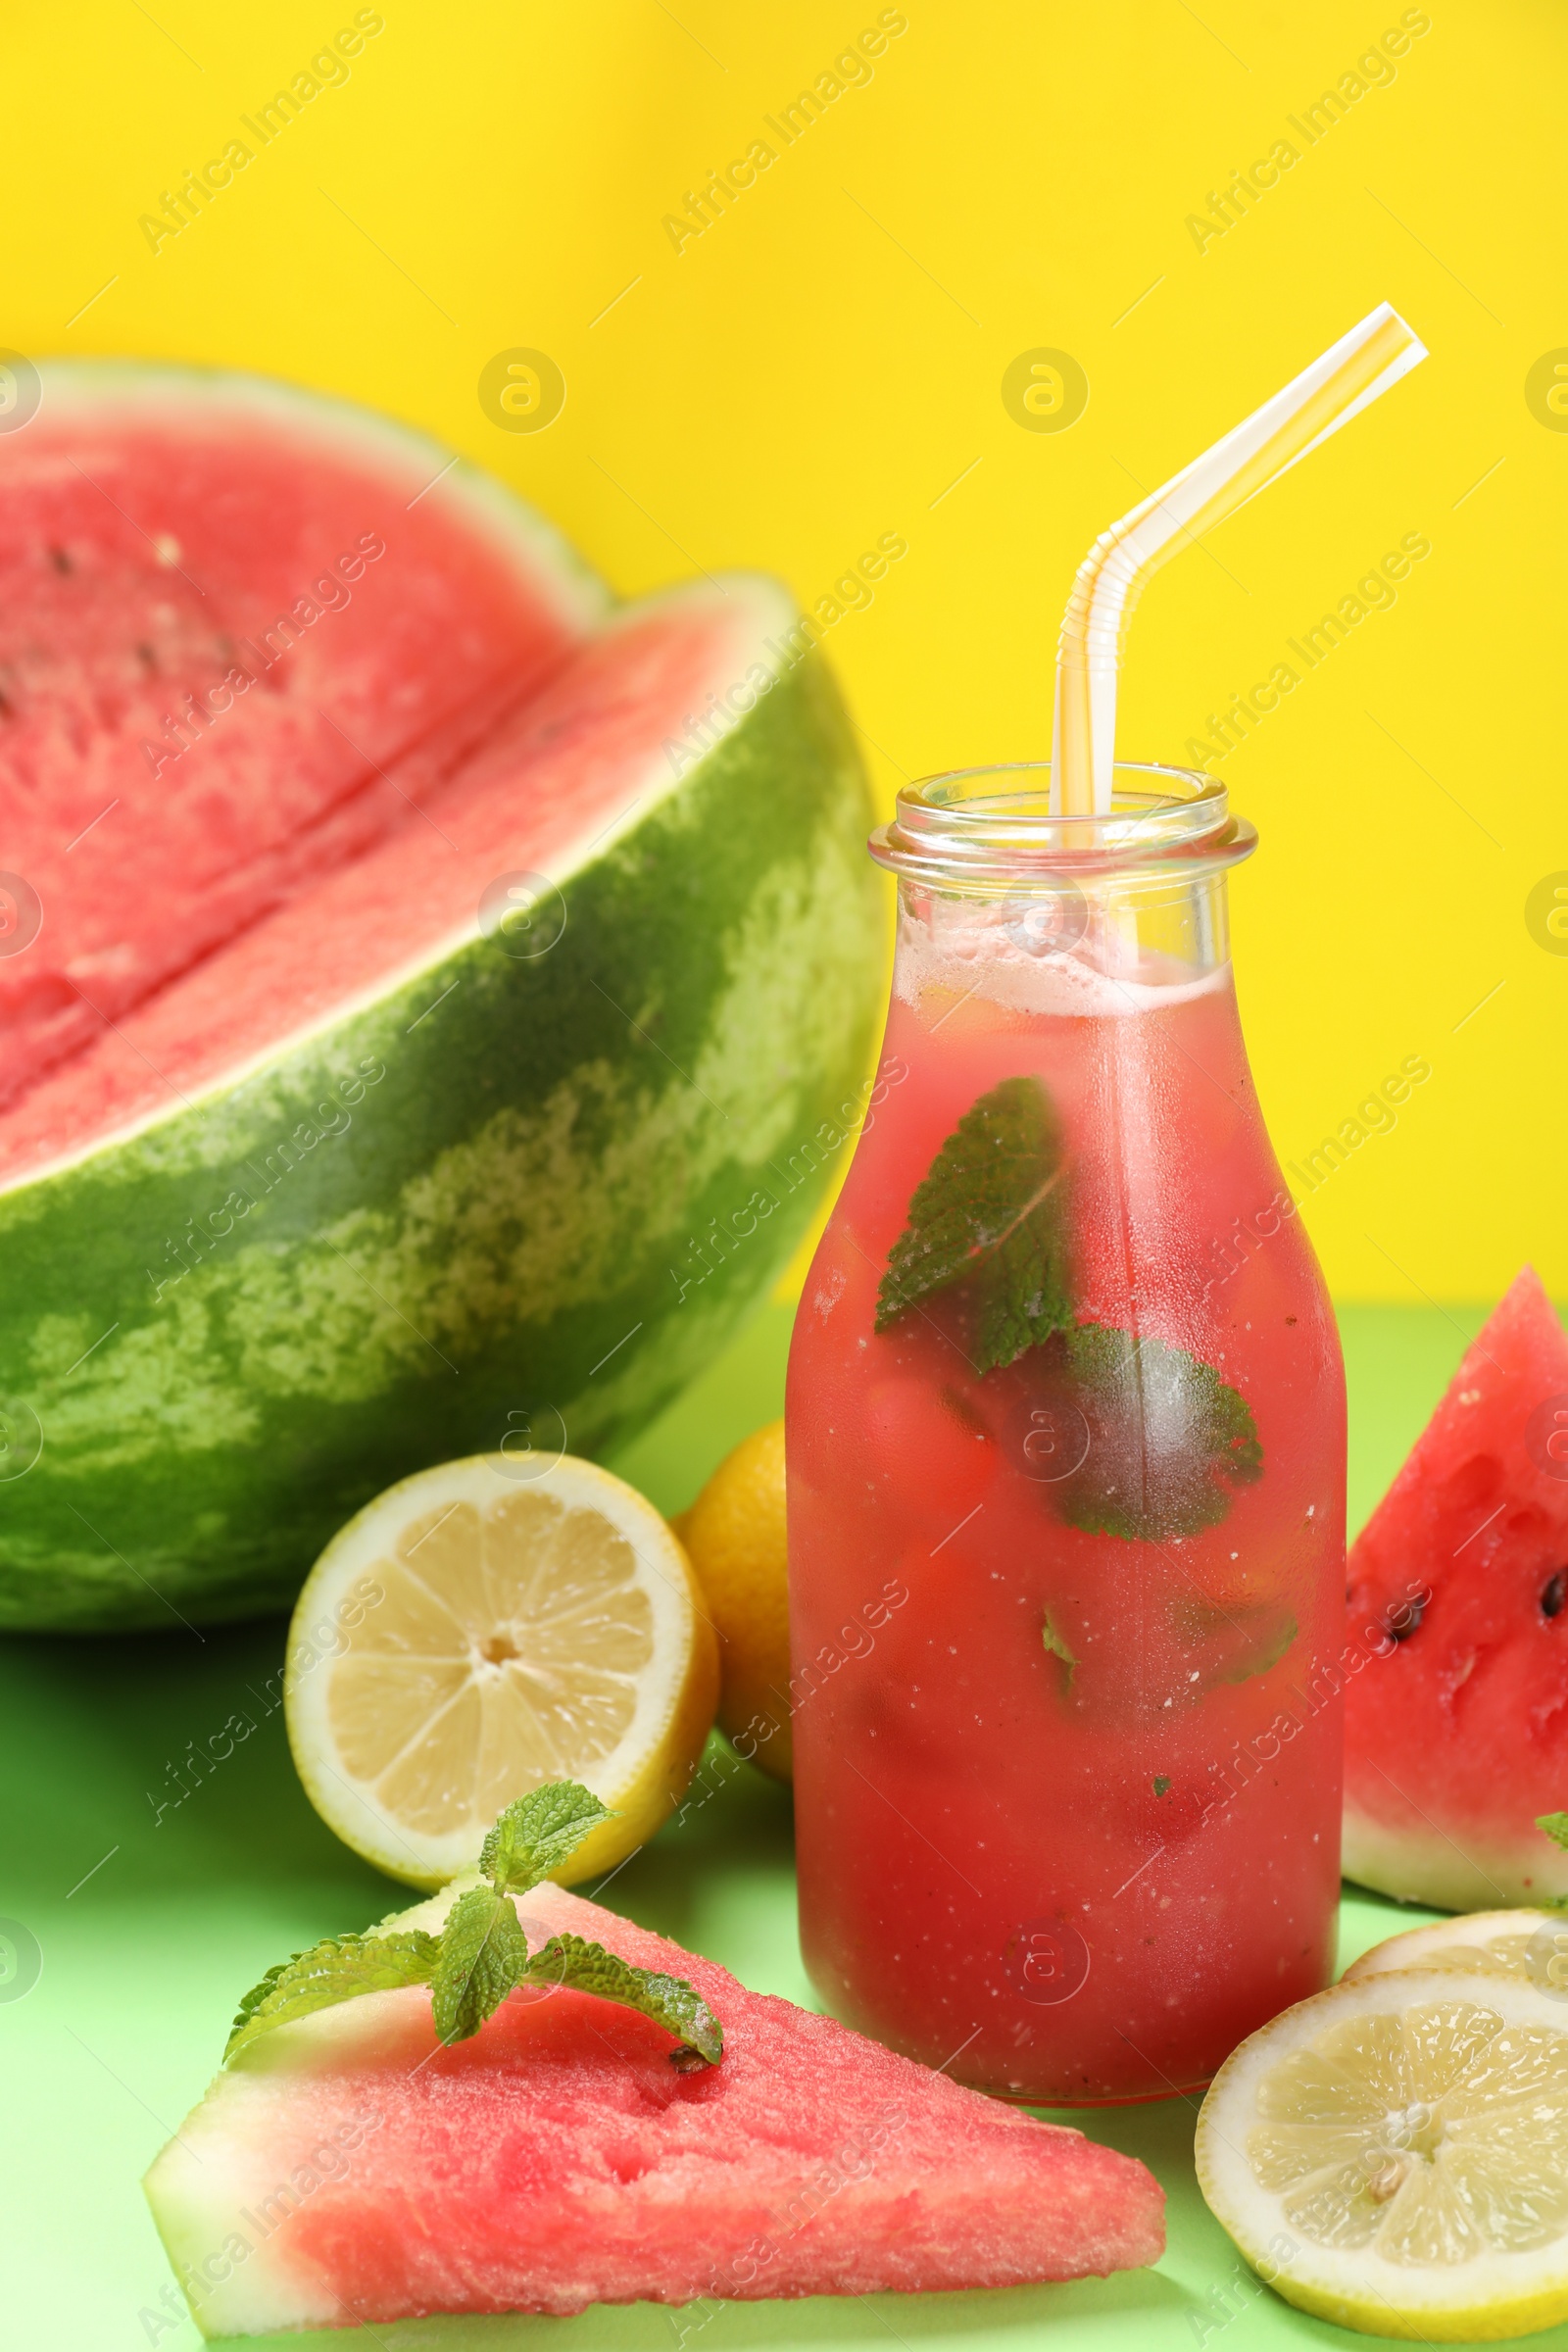 Photo of Tasty watermelon drink and fresh fruits on green table against yellow background